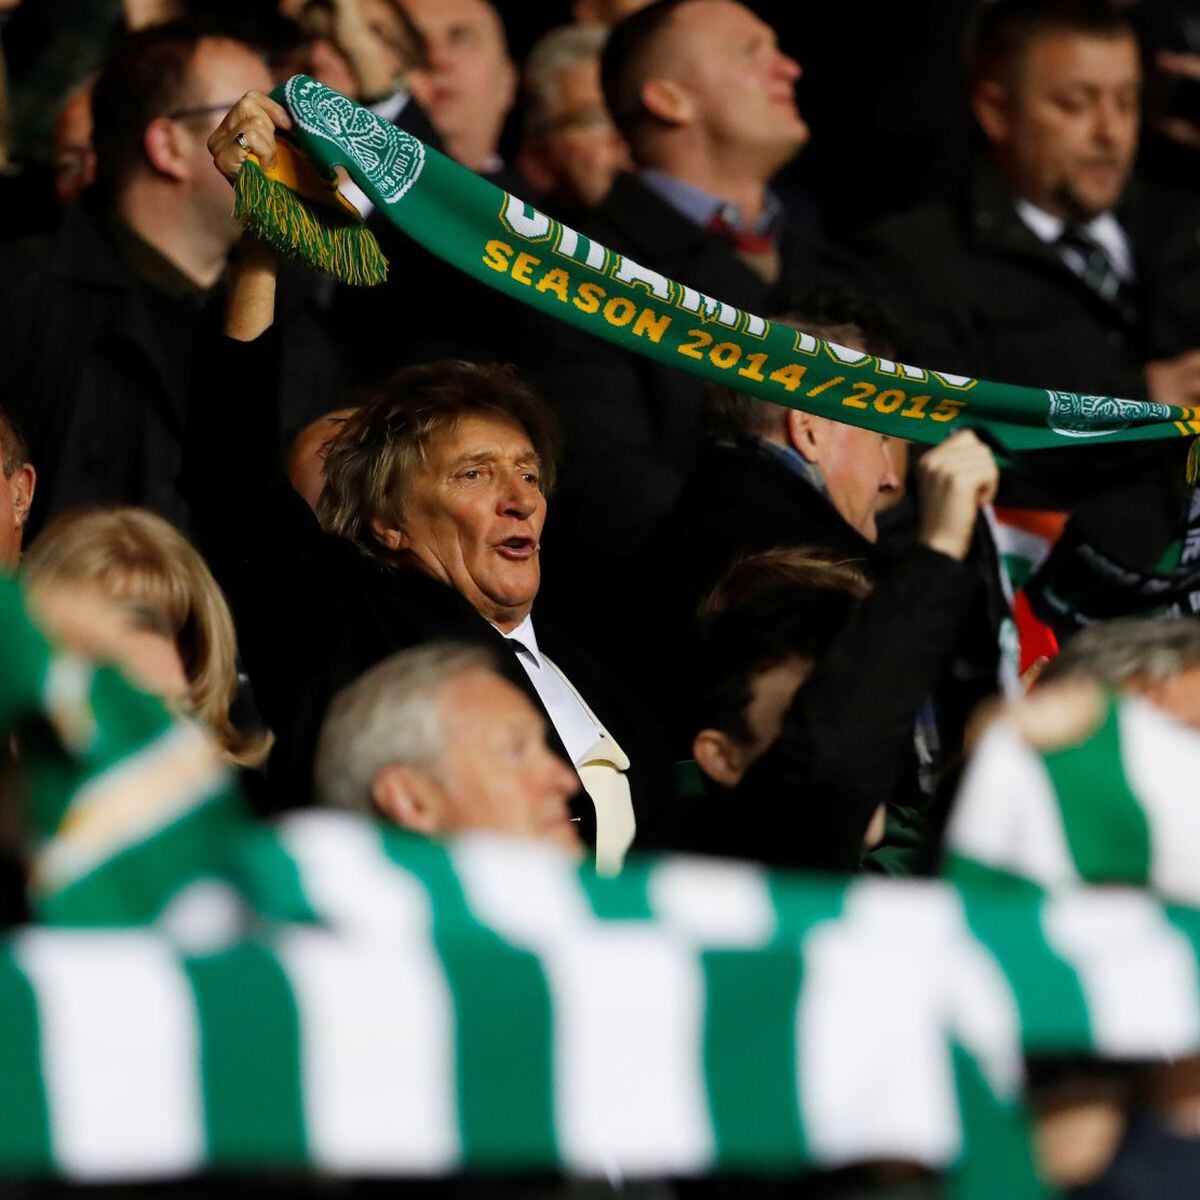 Rod Stewart Says He 'Turned Down' $1 Million to Perform in Qatar